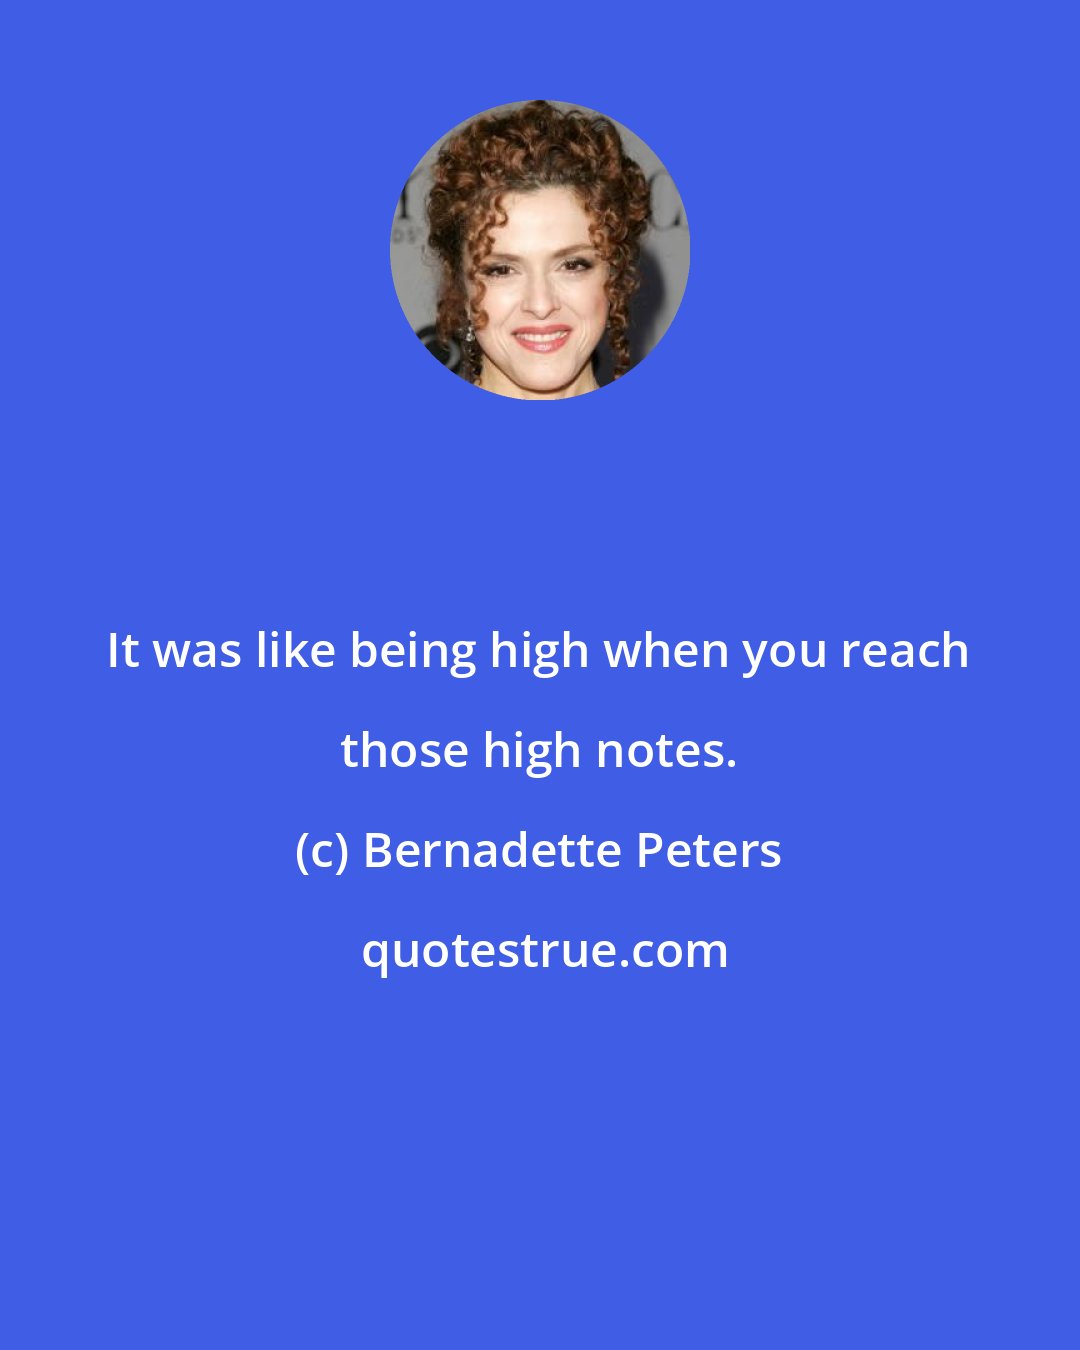 Bernadette Peters: It was like being high when you reach those high notes.